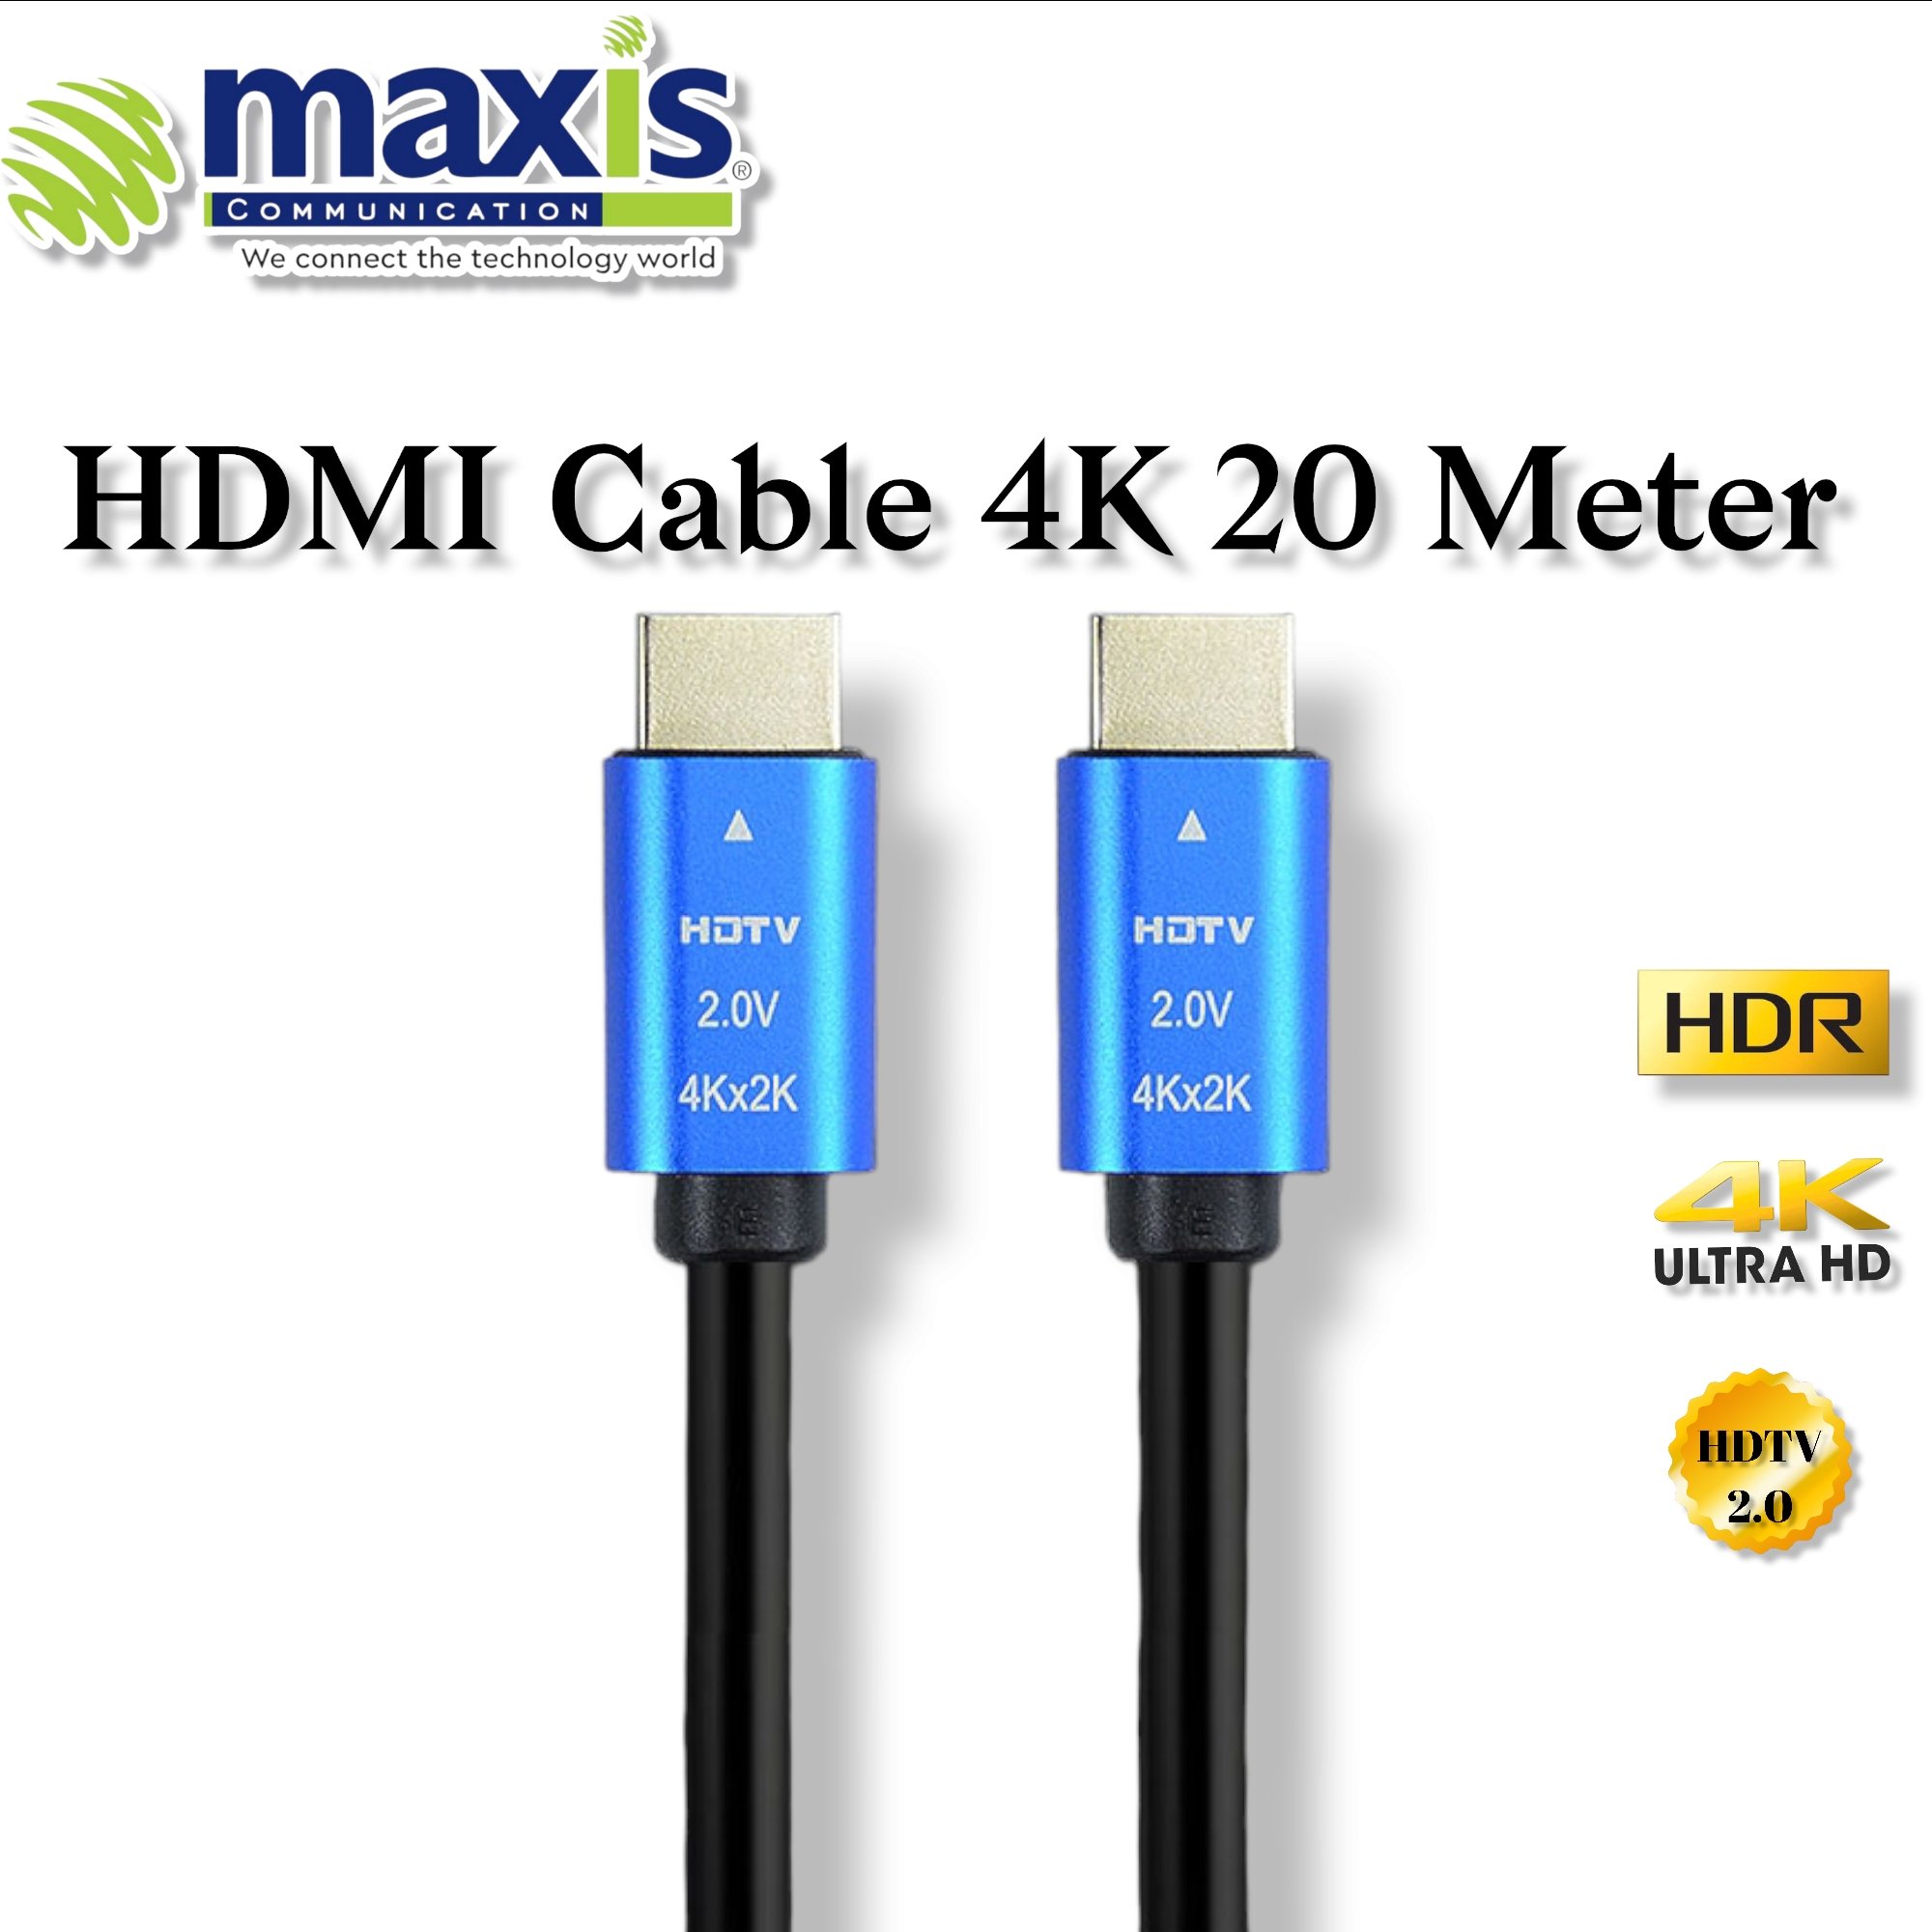 product.php?id=FISCO 2.0v HDM Premium Cable Ultra Hd 4k 20m